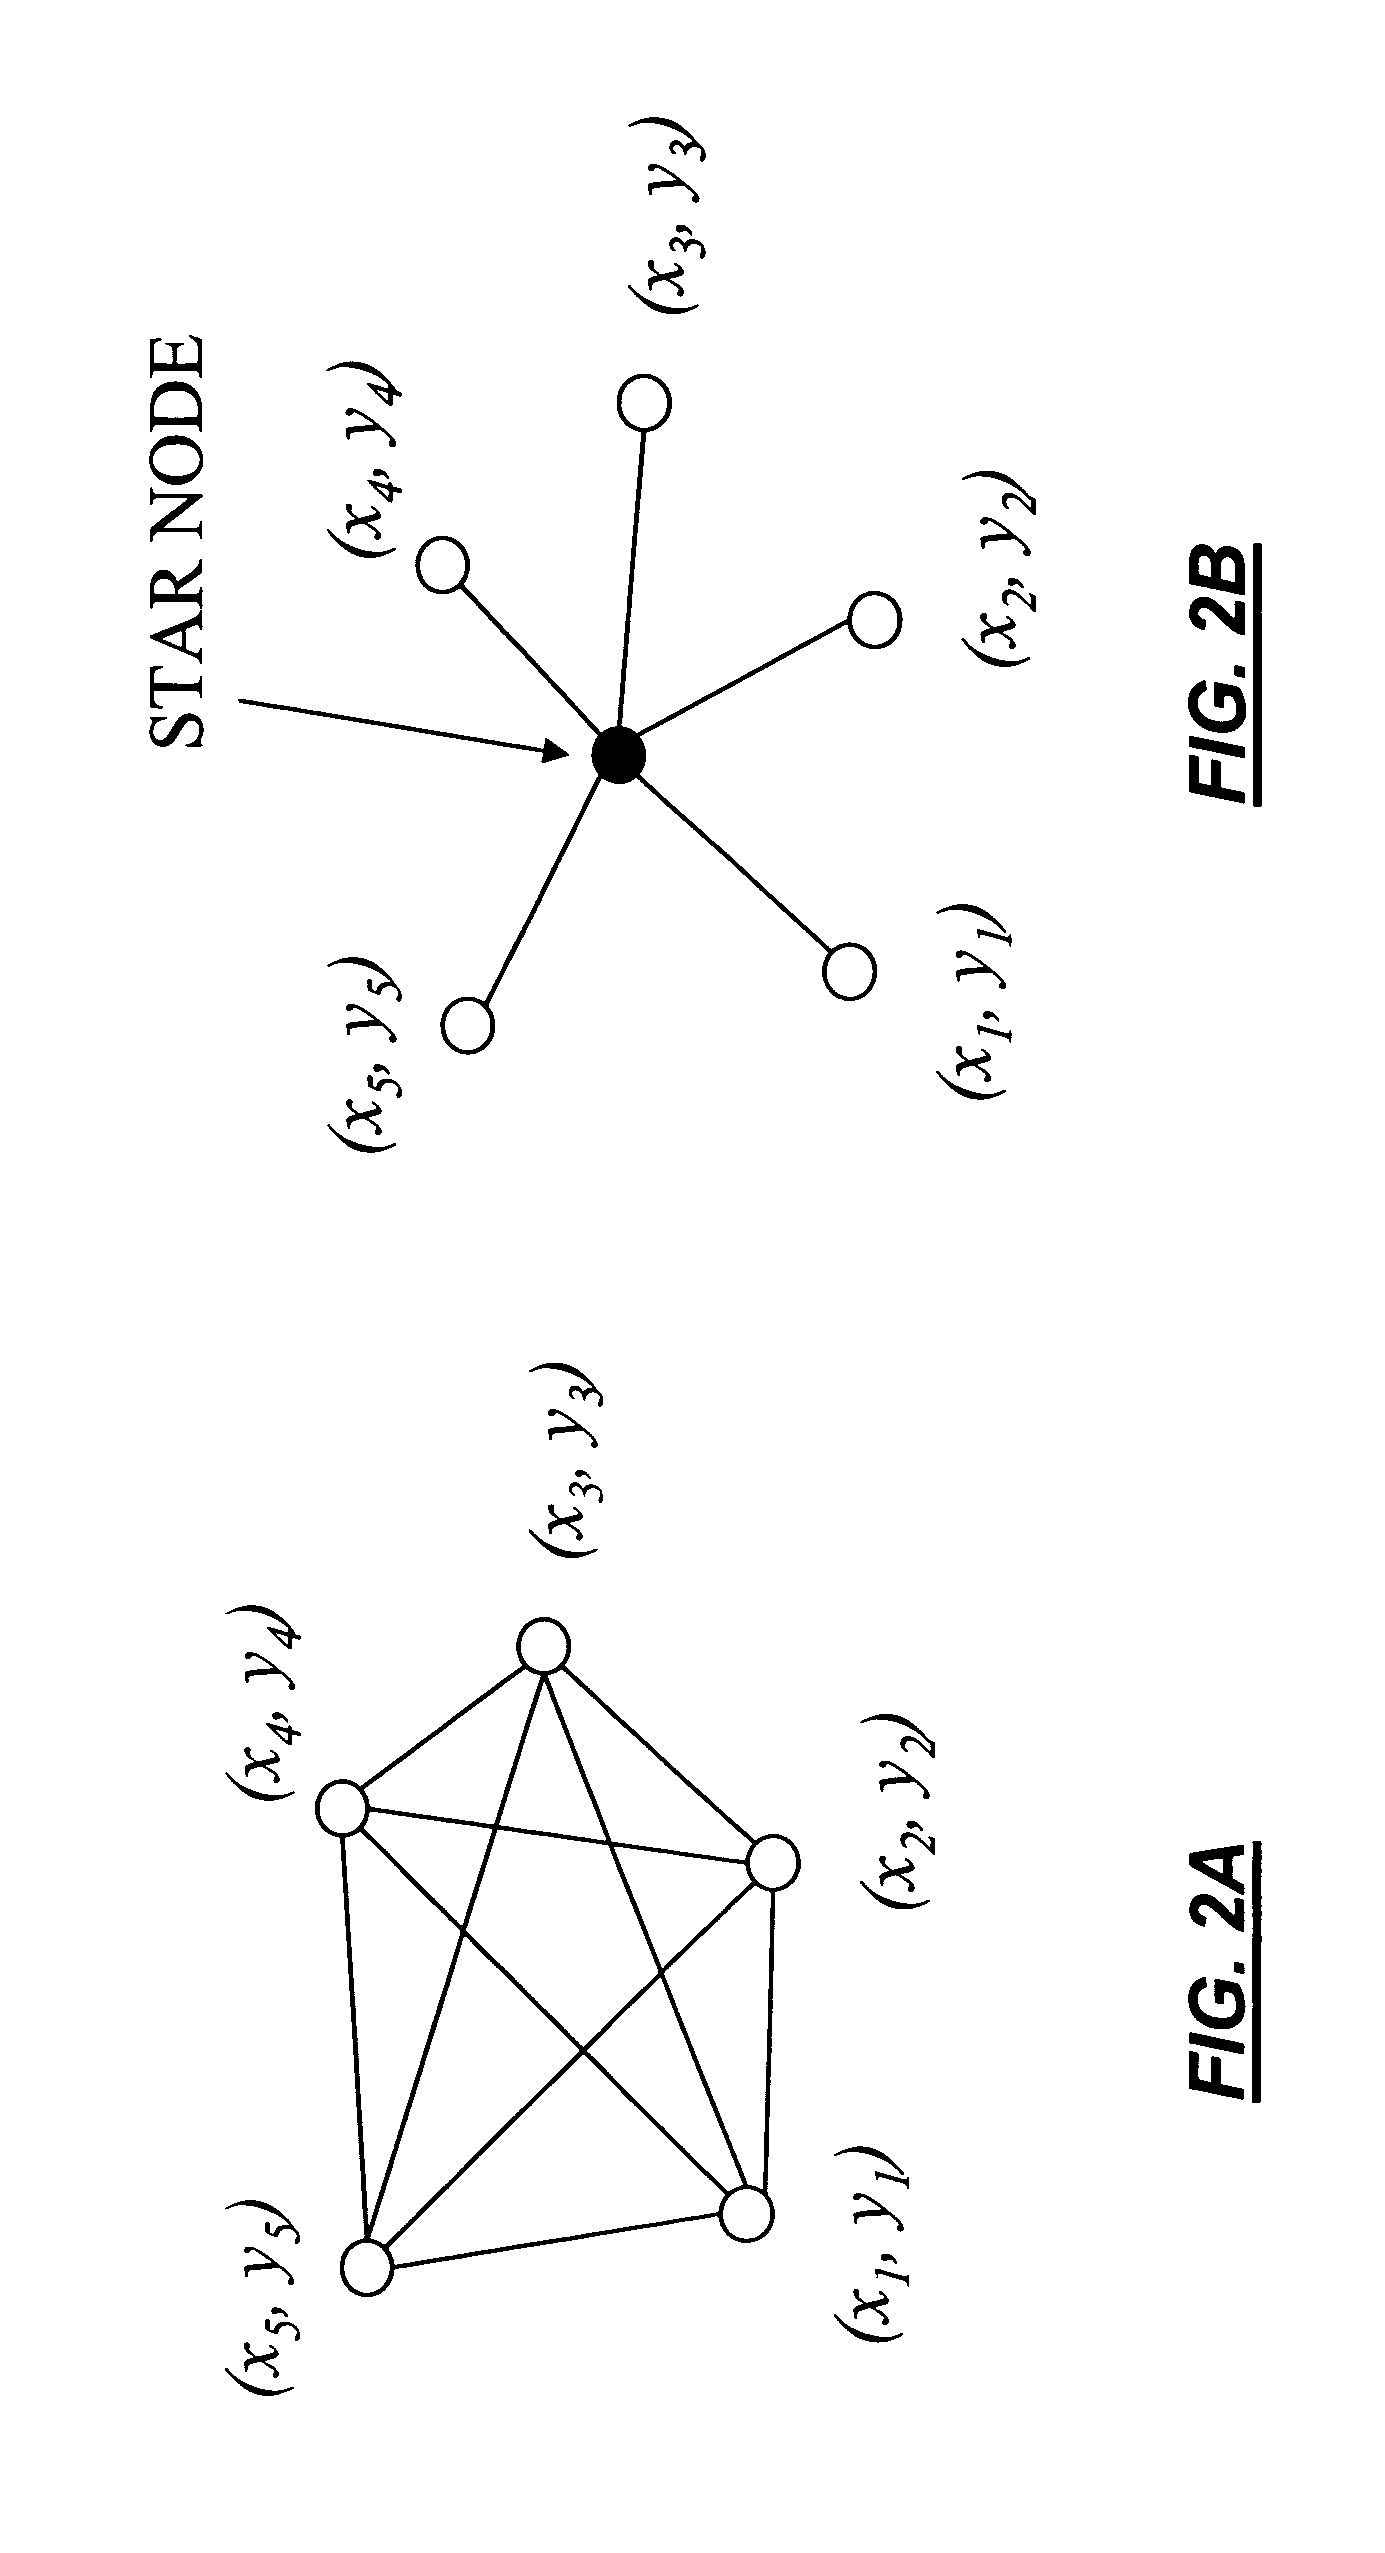 Fastplace method for integrated circuit design